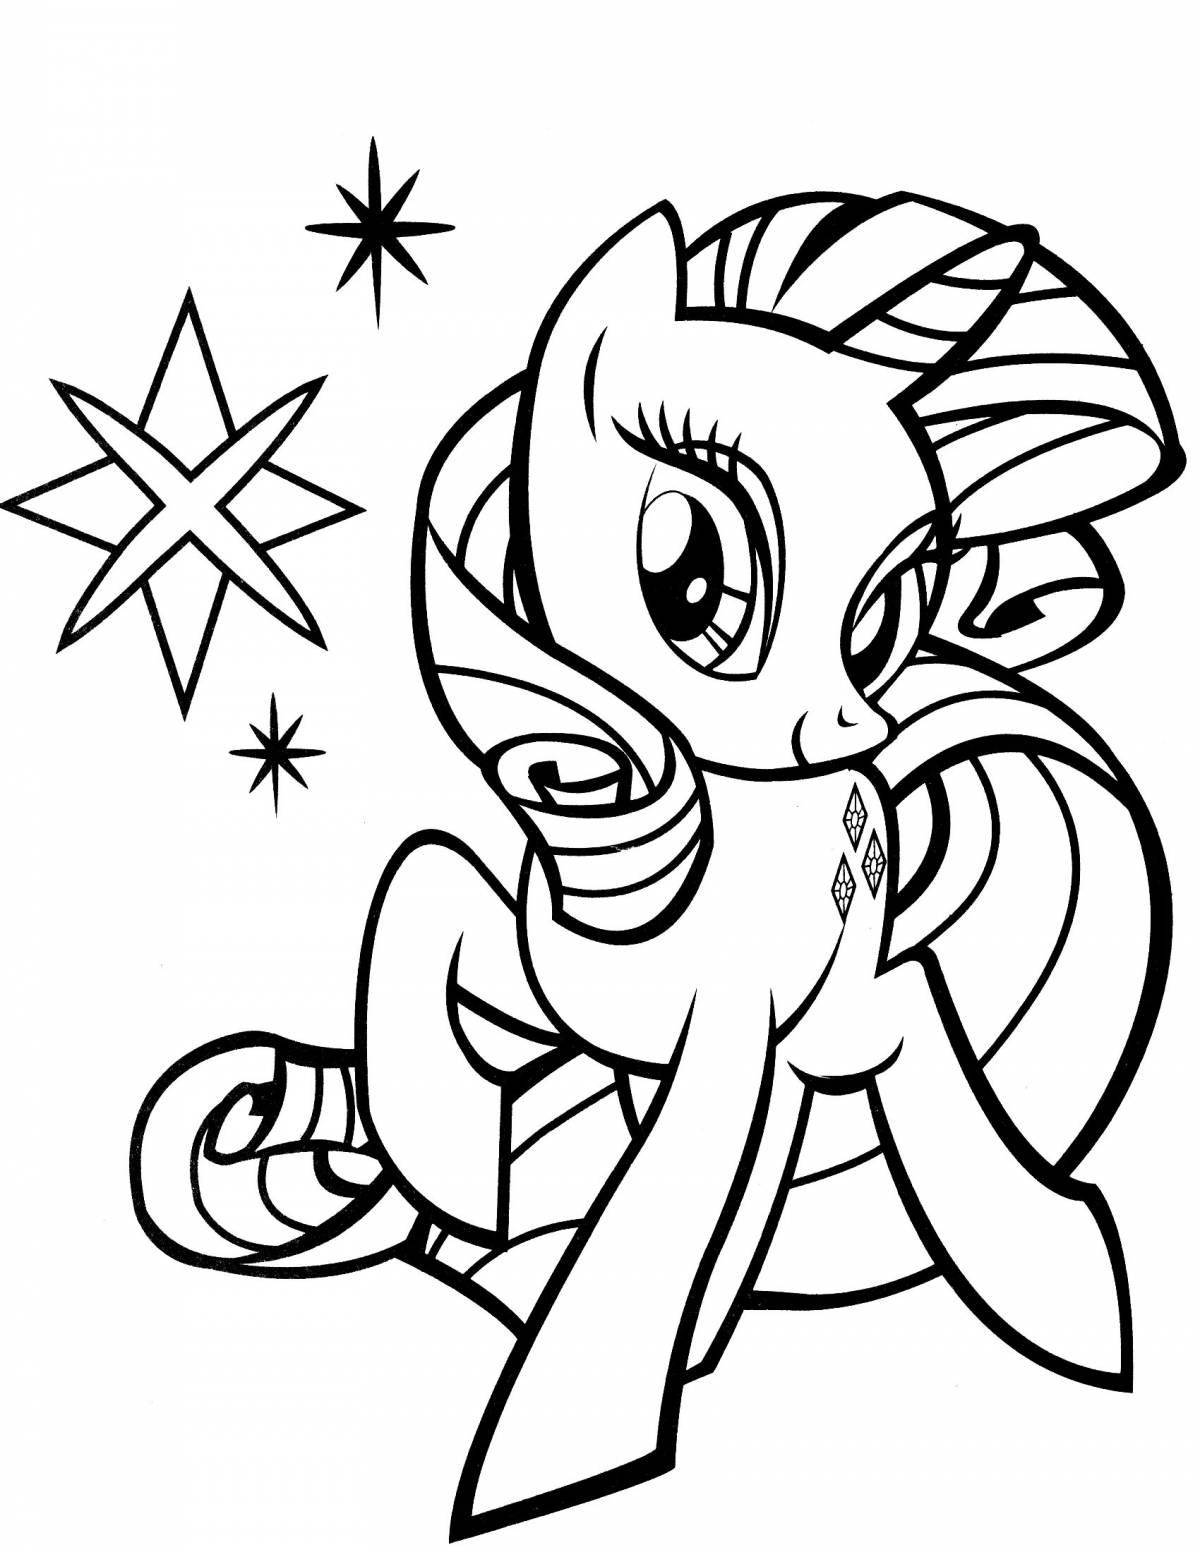 Playful mei little pony coloring book